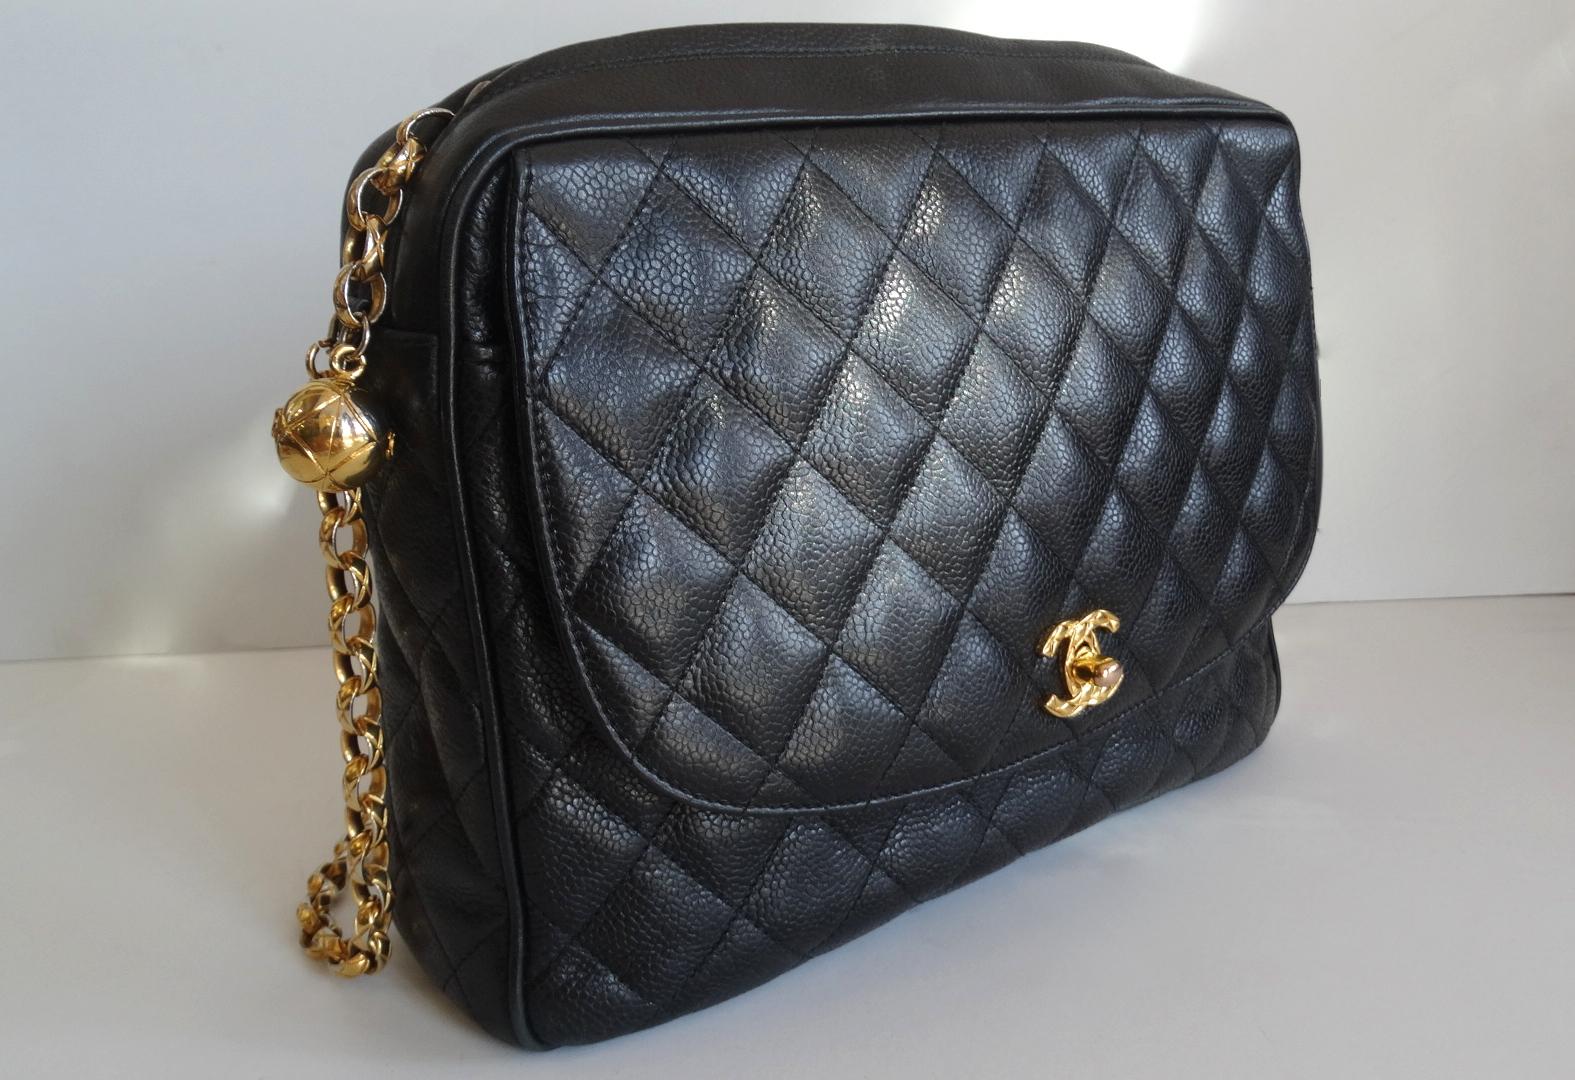 The Chanel Bag Of Your Dreams Is Here! Circa late 1980s, this classic bag features gold hardware and beautiful black caviar leather. Font face of bag includes a quilted textured signature CC mademoiselle turn lock which opens to reveal a flat